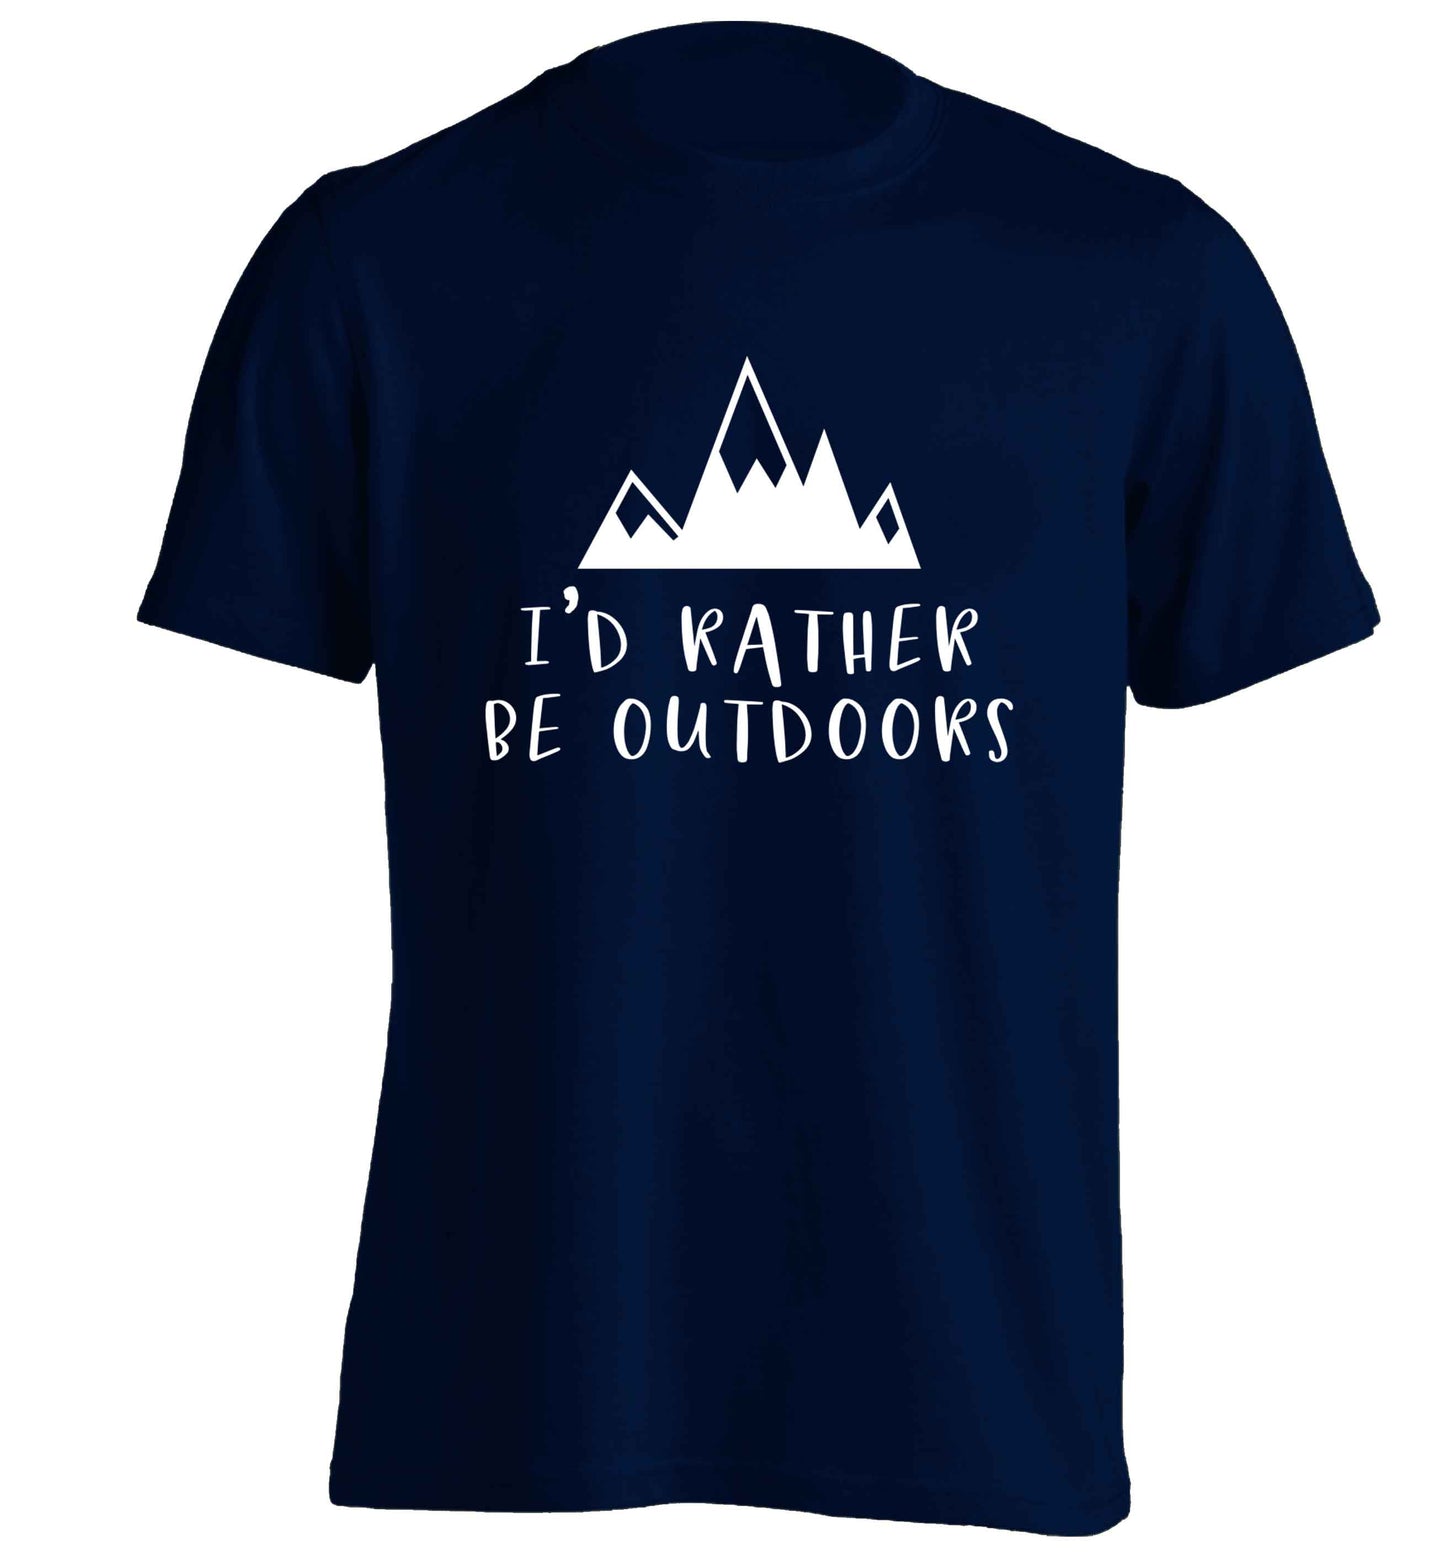 I'd rather be outdoors adults unisex navy Tshirt 2XL